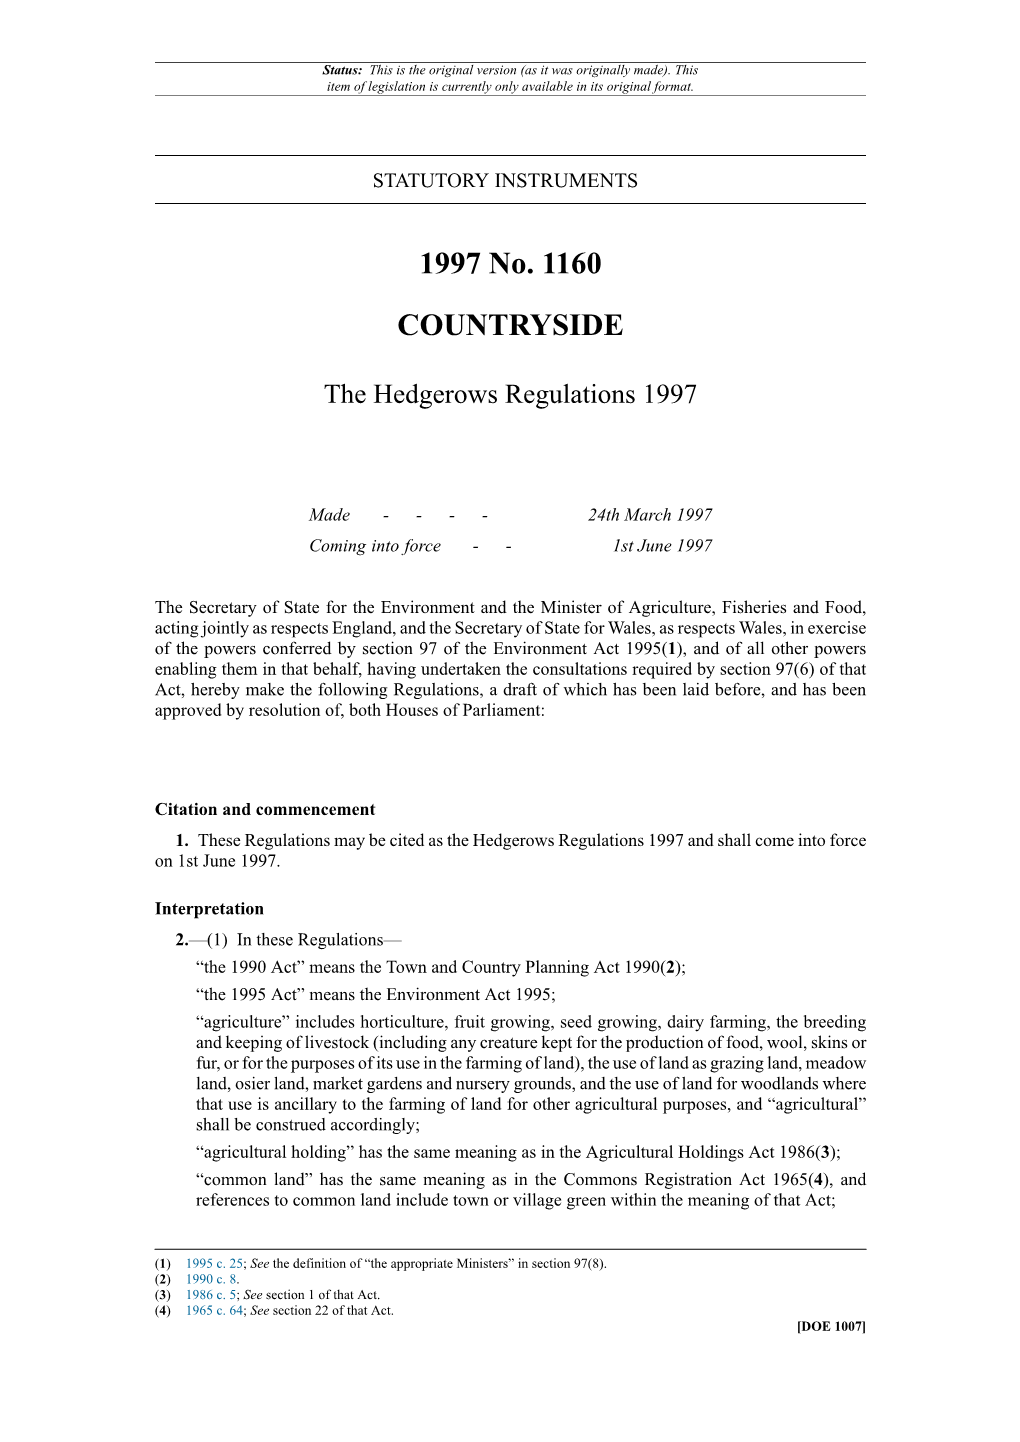 The Hedgerows Regulations 1997